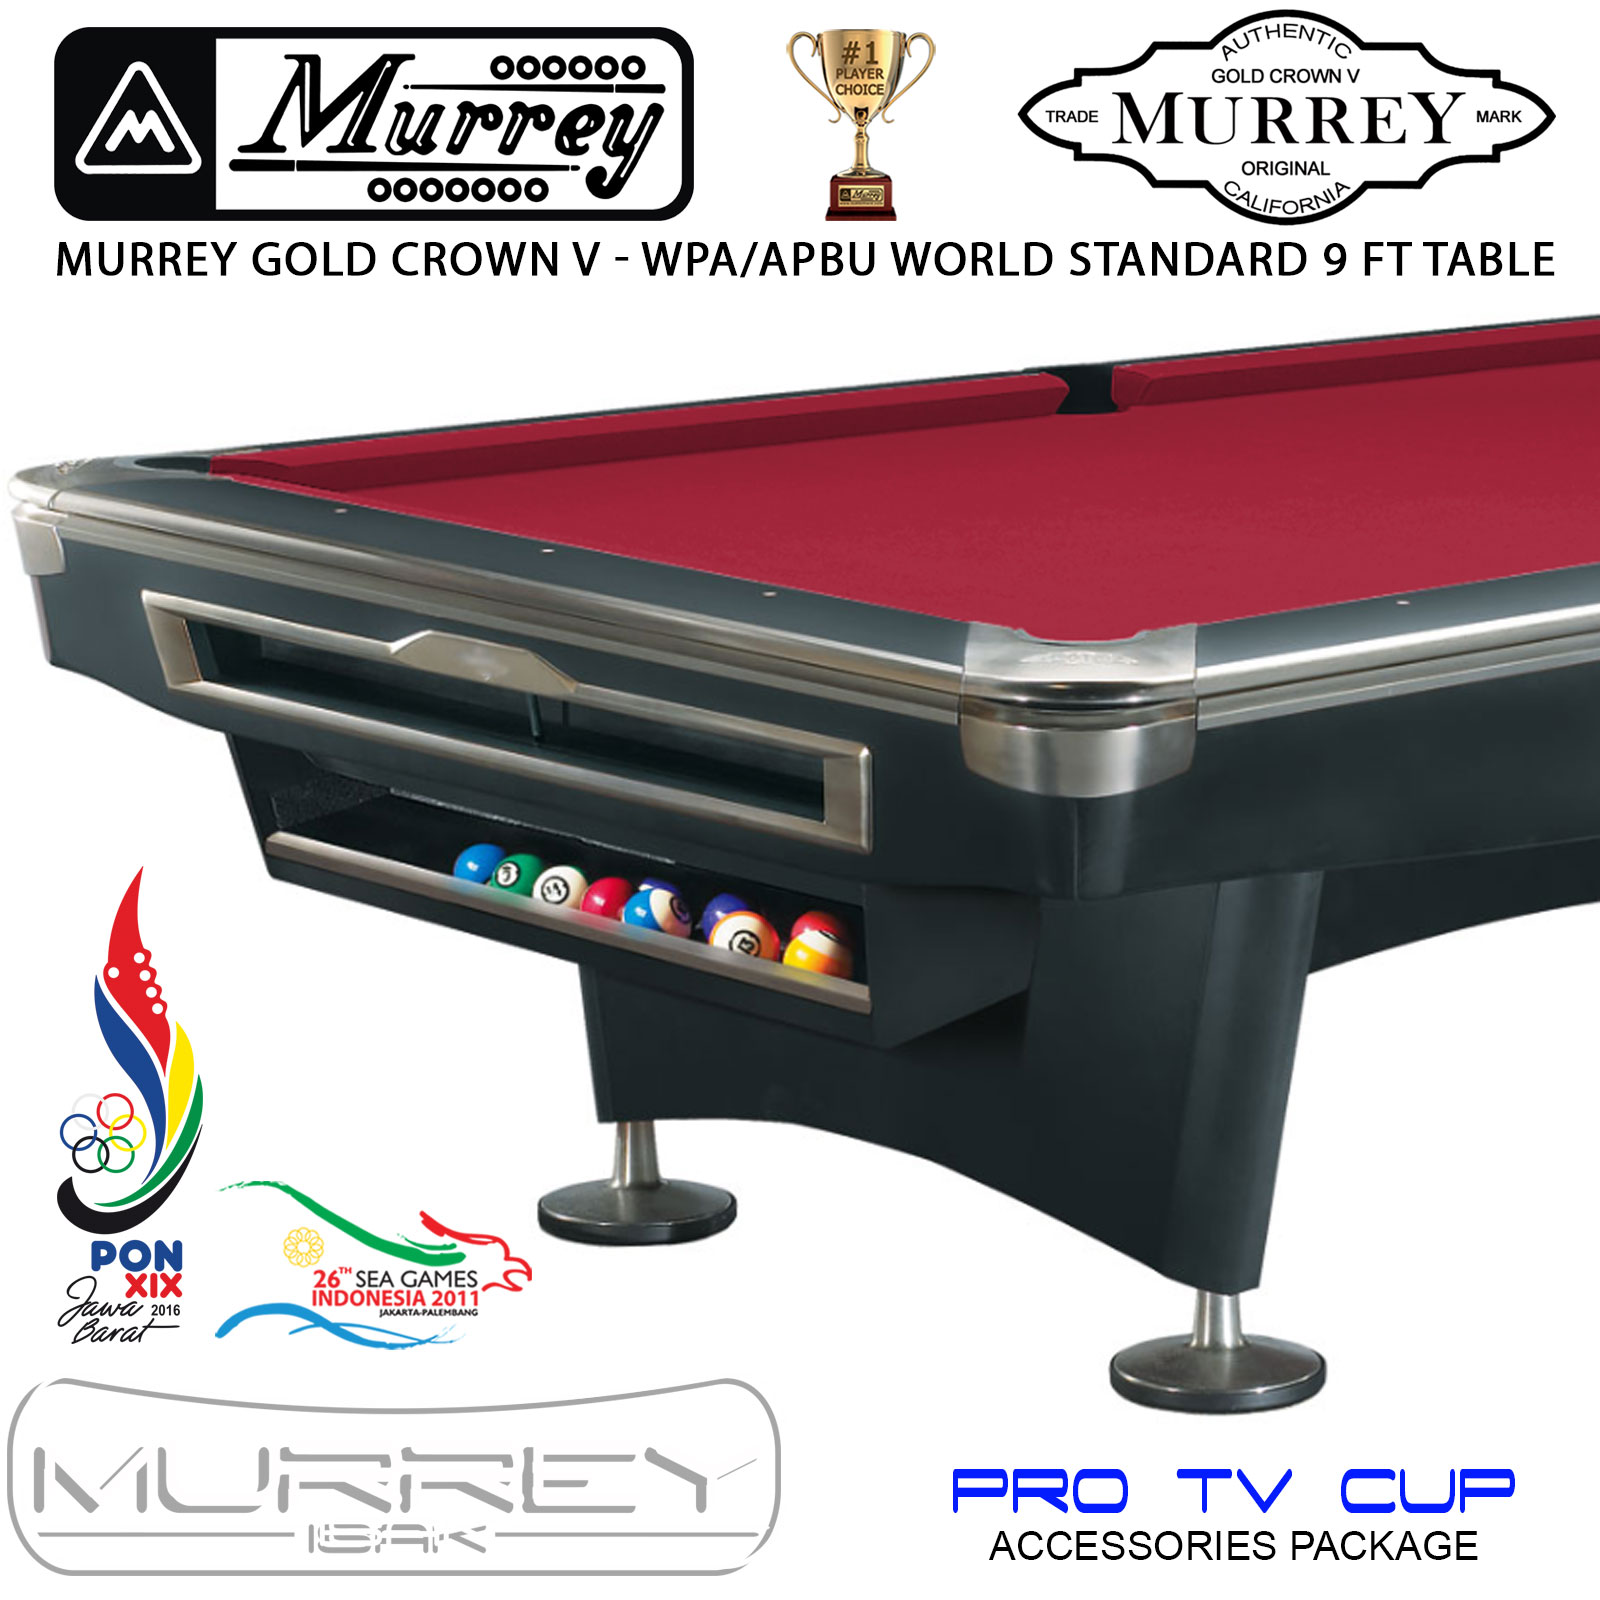 AMF Pool Tables: Everything You Need To Know - Review And Analysis of AMF History and Table Details